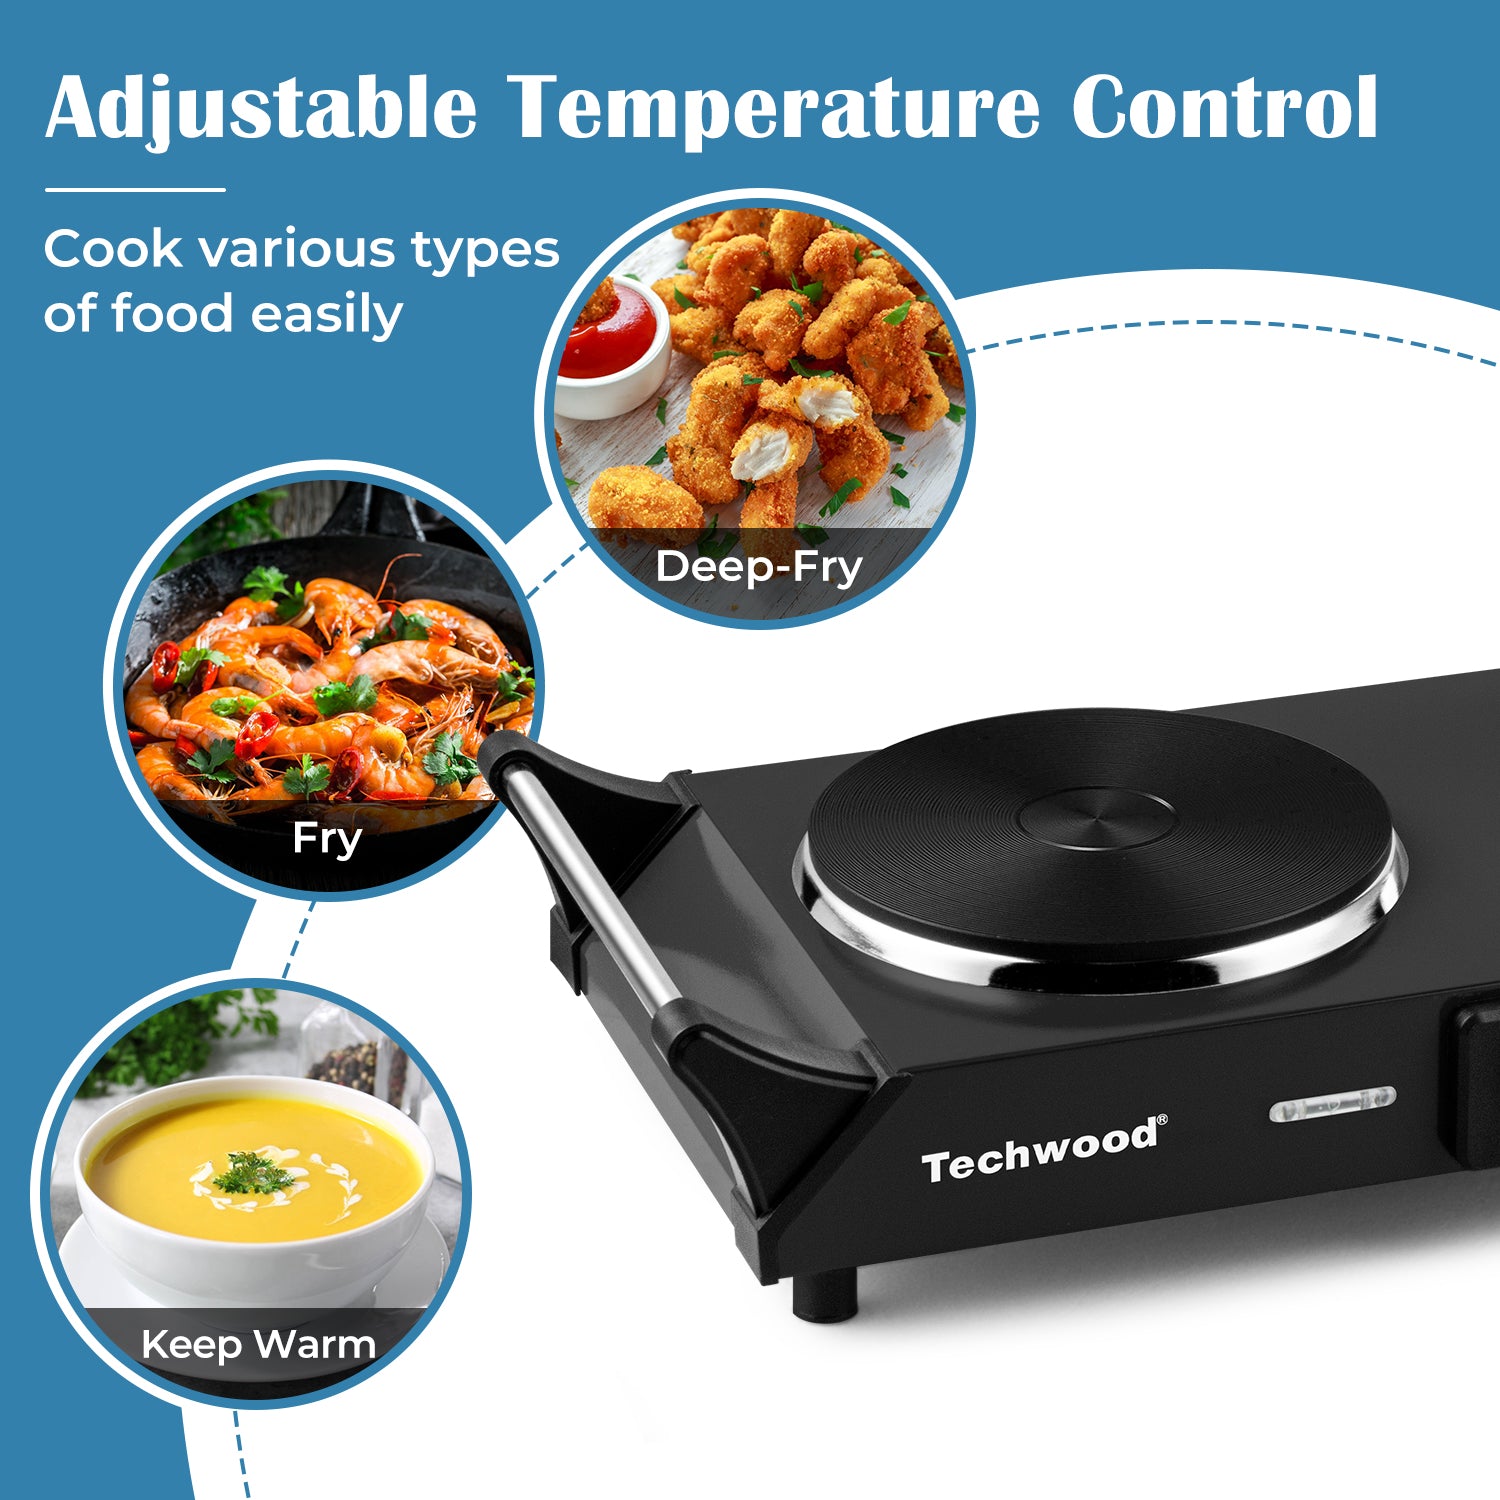 Hot Plate, Techwood Double Burner for Cooking, 1800W Countertop Electric Stoves with Adjustable Temperature & Stay Cool Handles, Dual Cooktop for RV